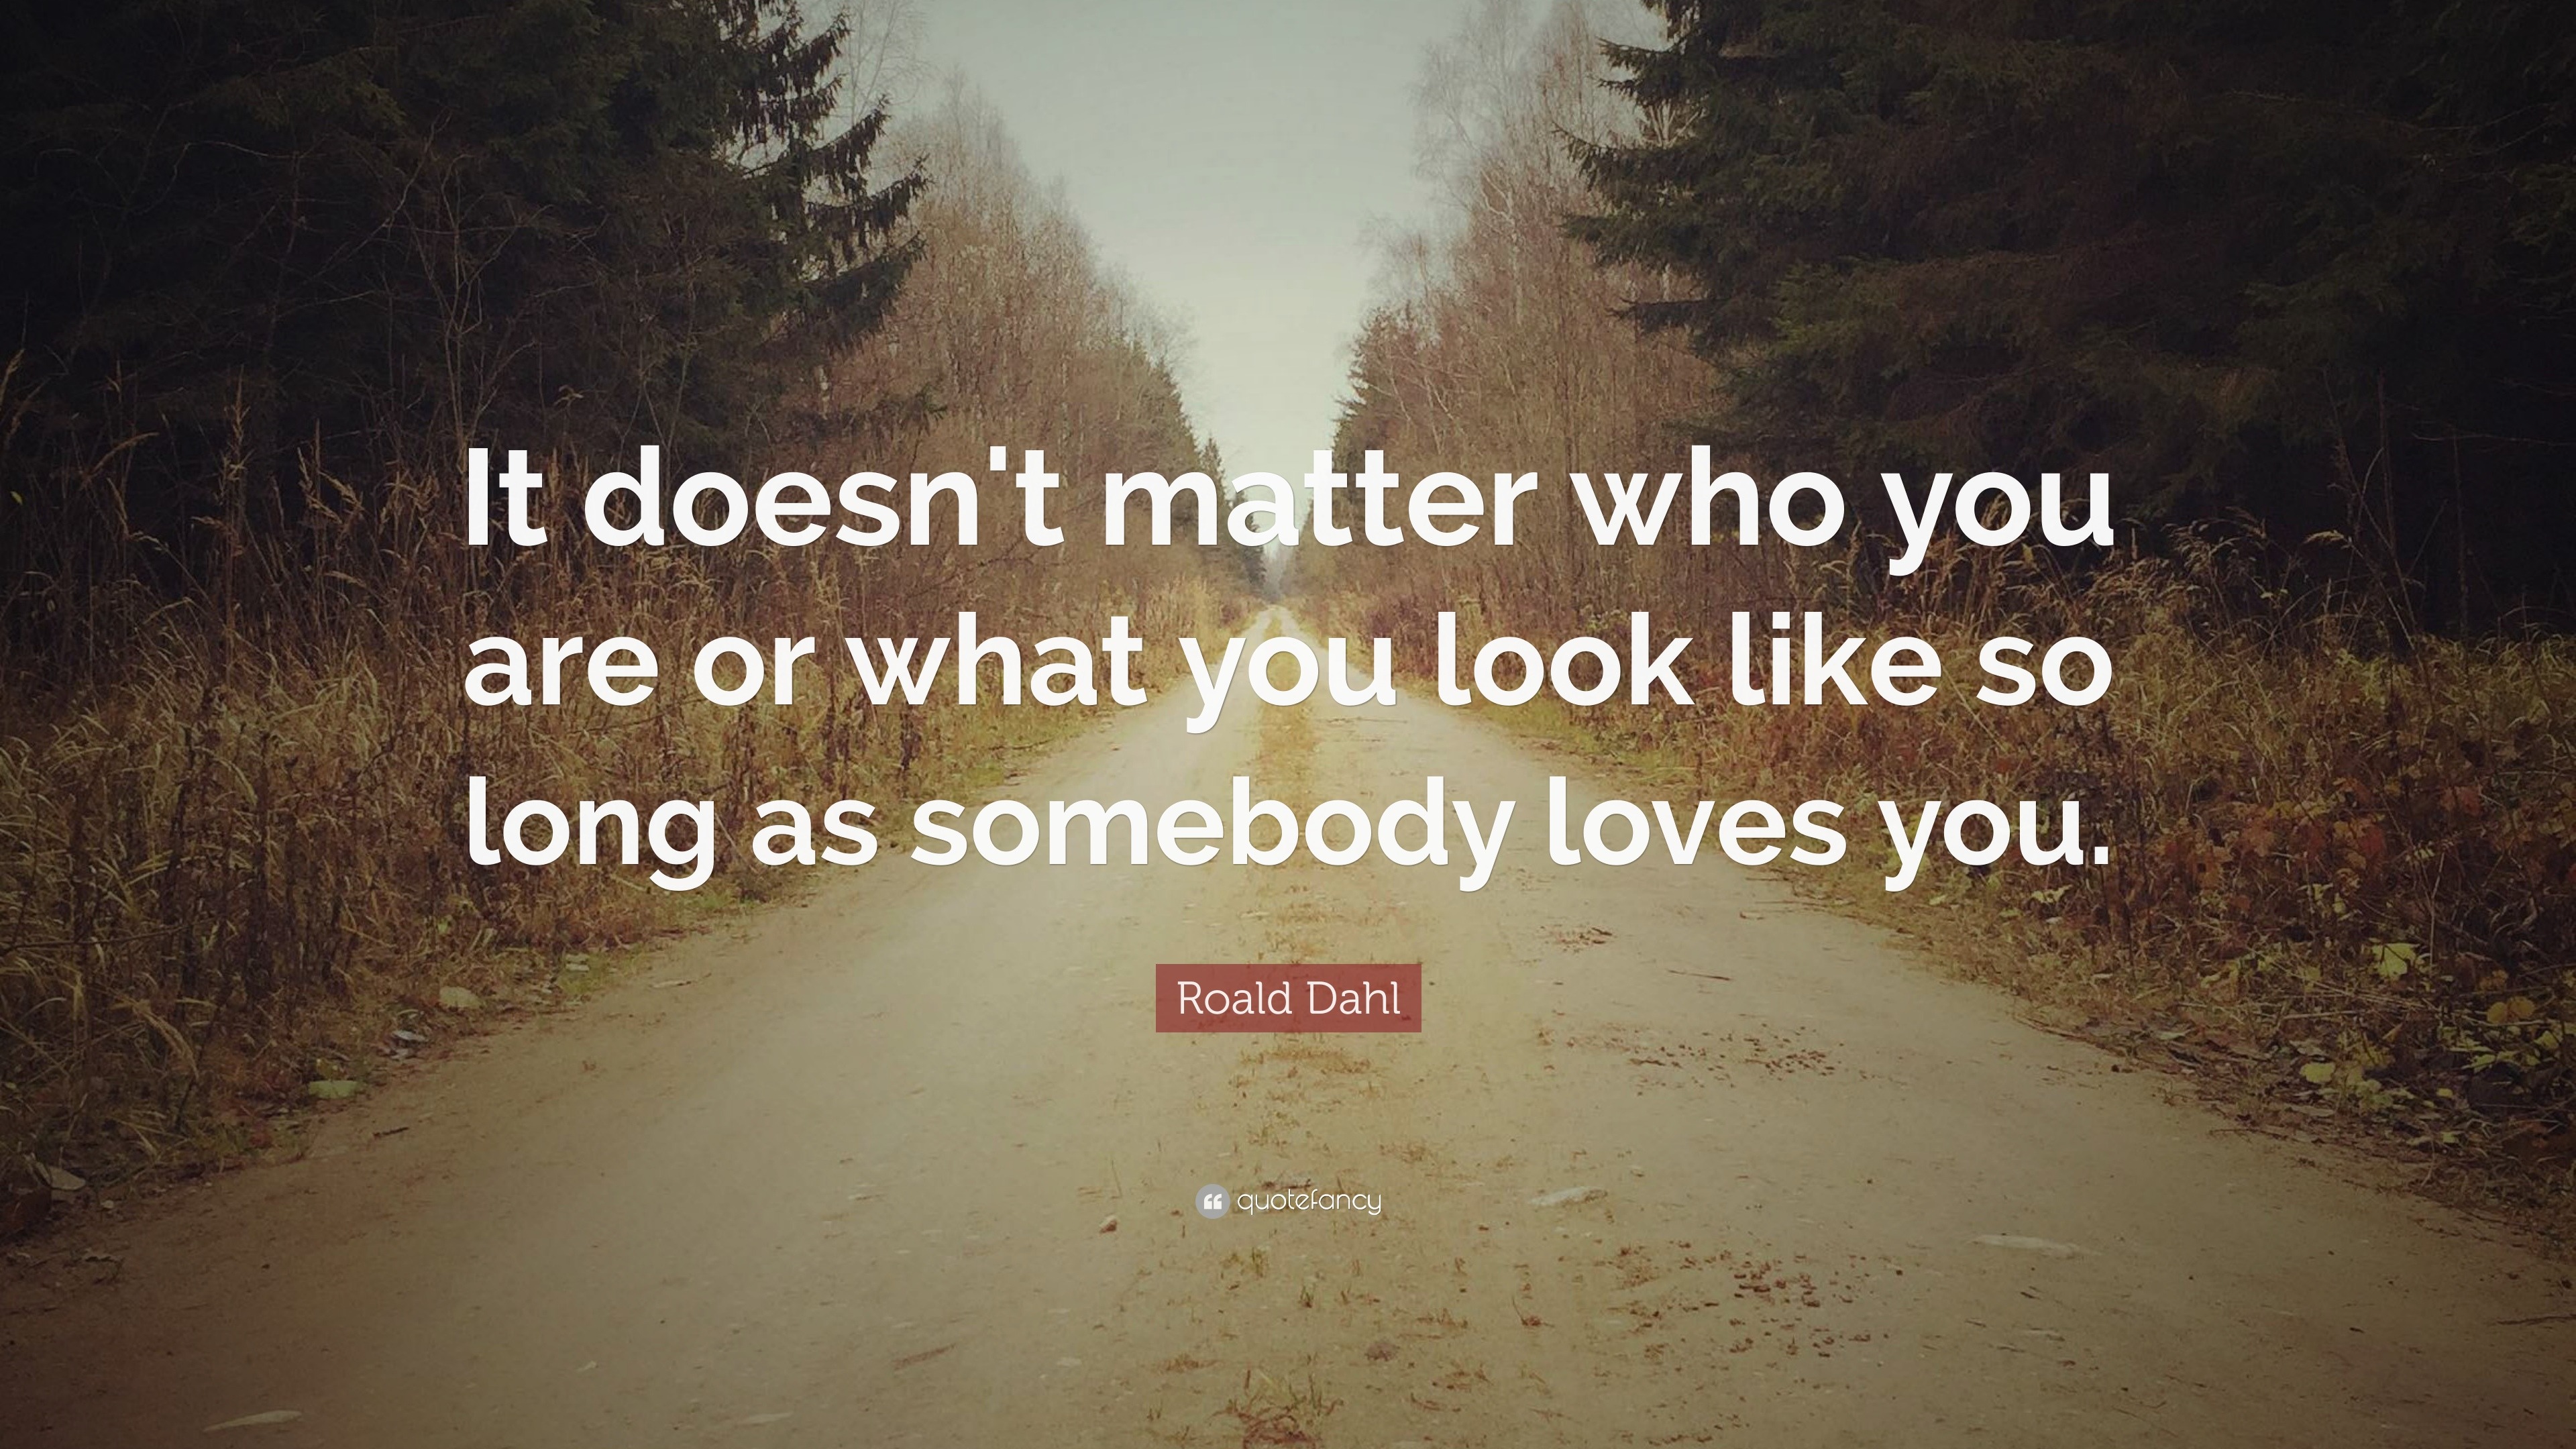 Roald Dahl Quote: “It doesn't matter who you are or what you look like ...